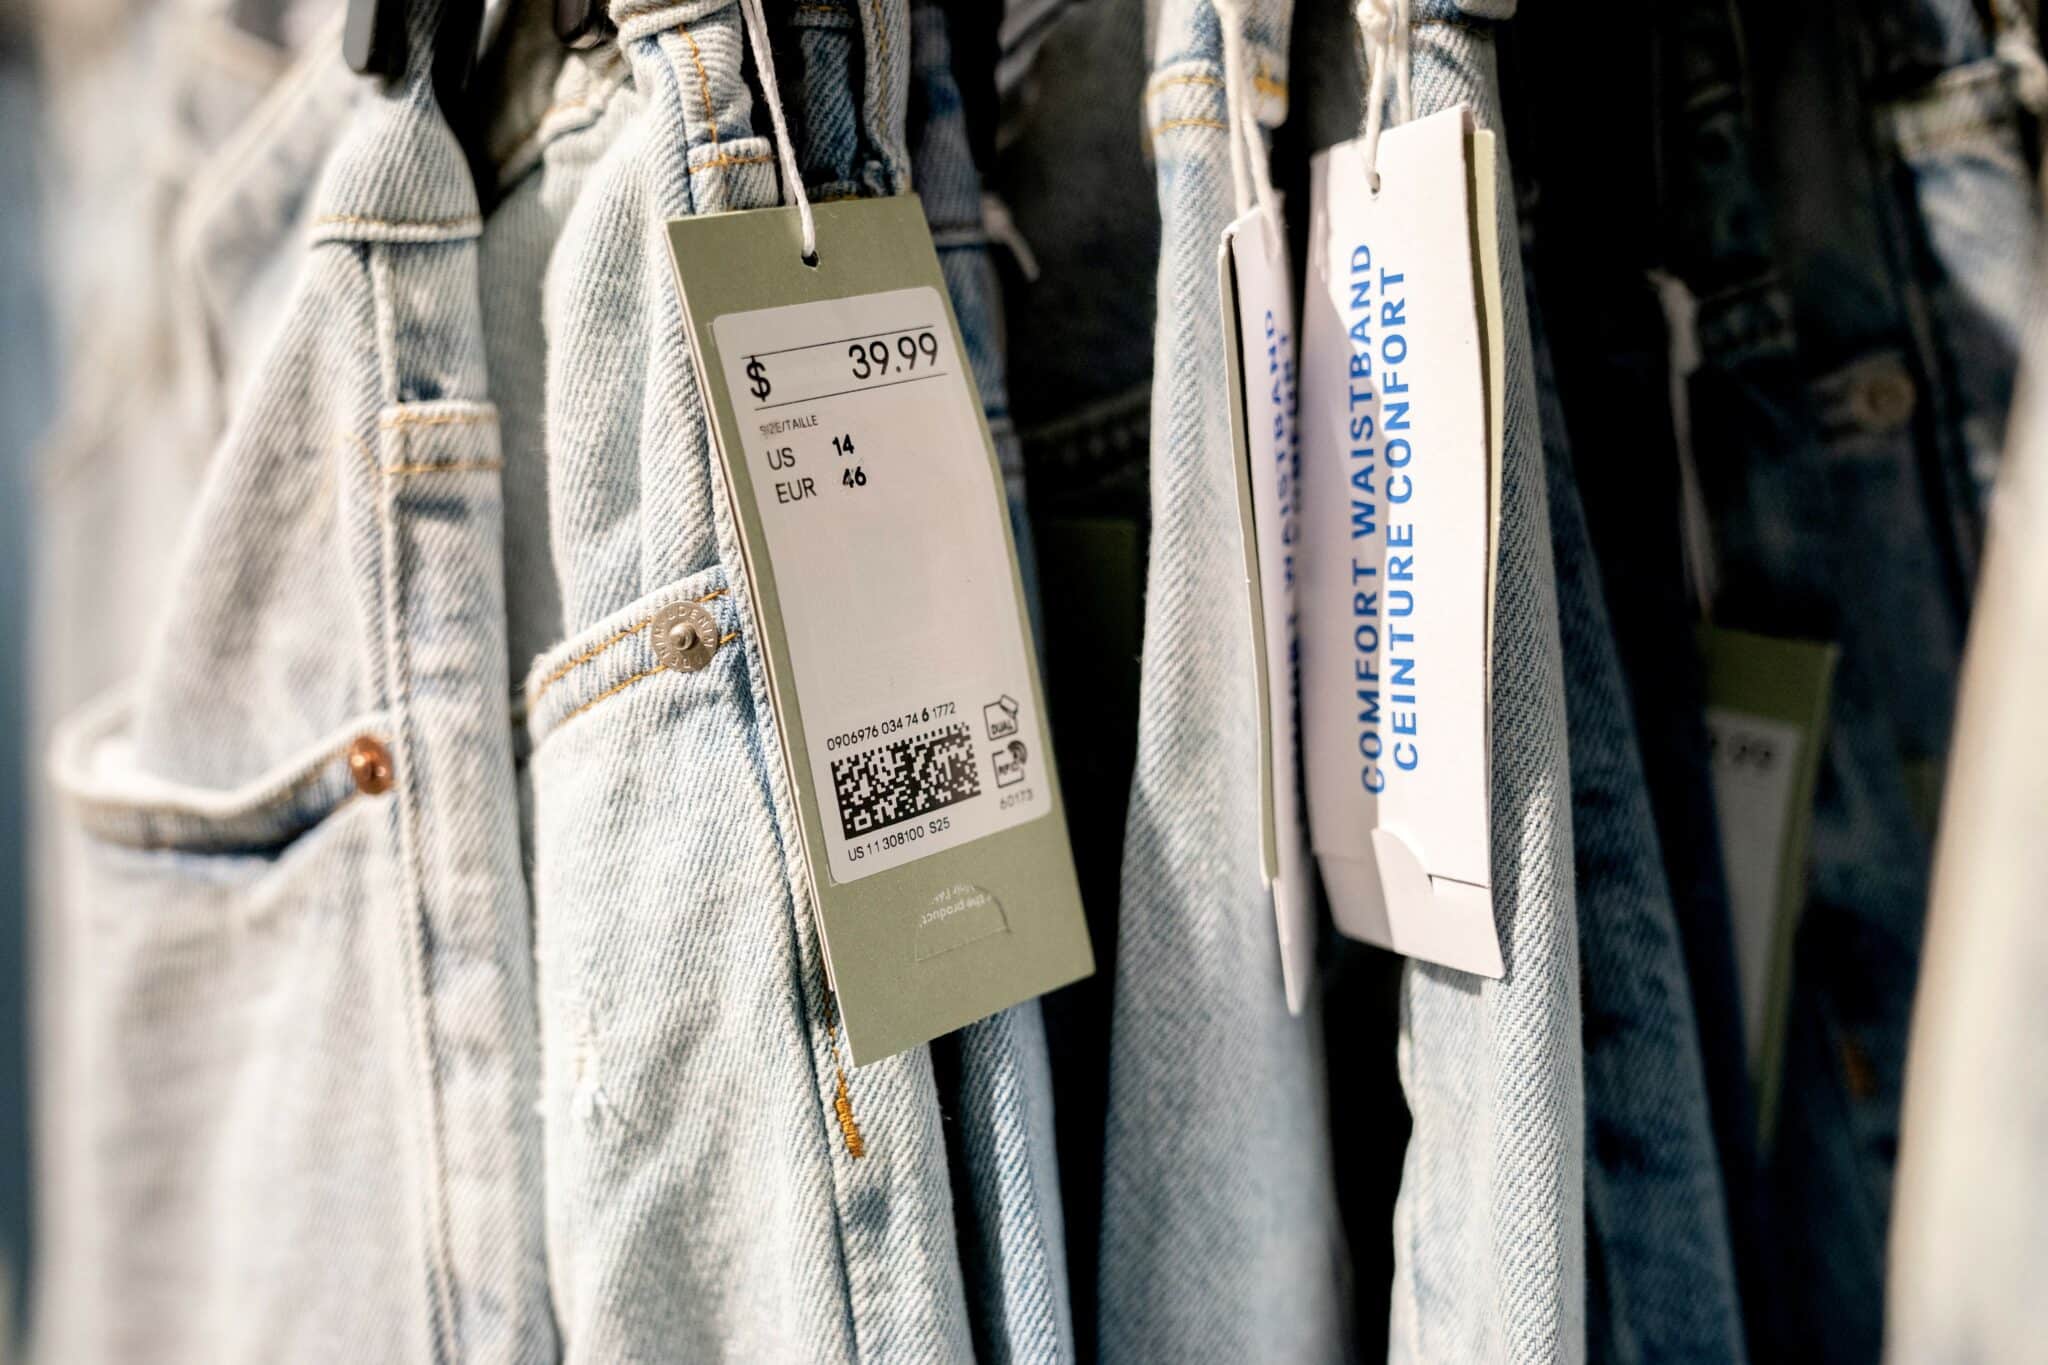 A price tag is seen on jeans in a clothing store in Washington, DC, on June 14, 2022. (Photo by Stefani Reynolds / AFP) (Photo by STEFANI REYNOLDS/AFP via Getty Images)